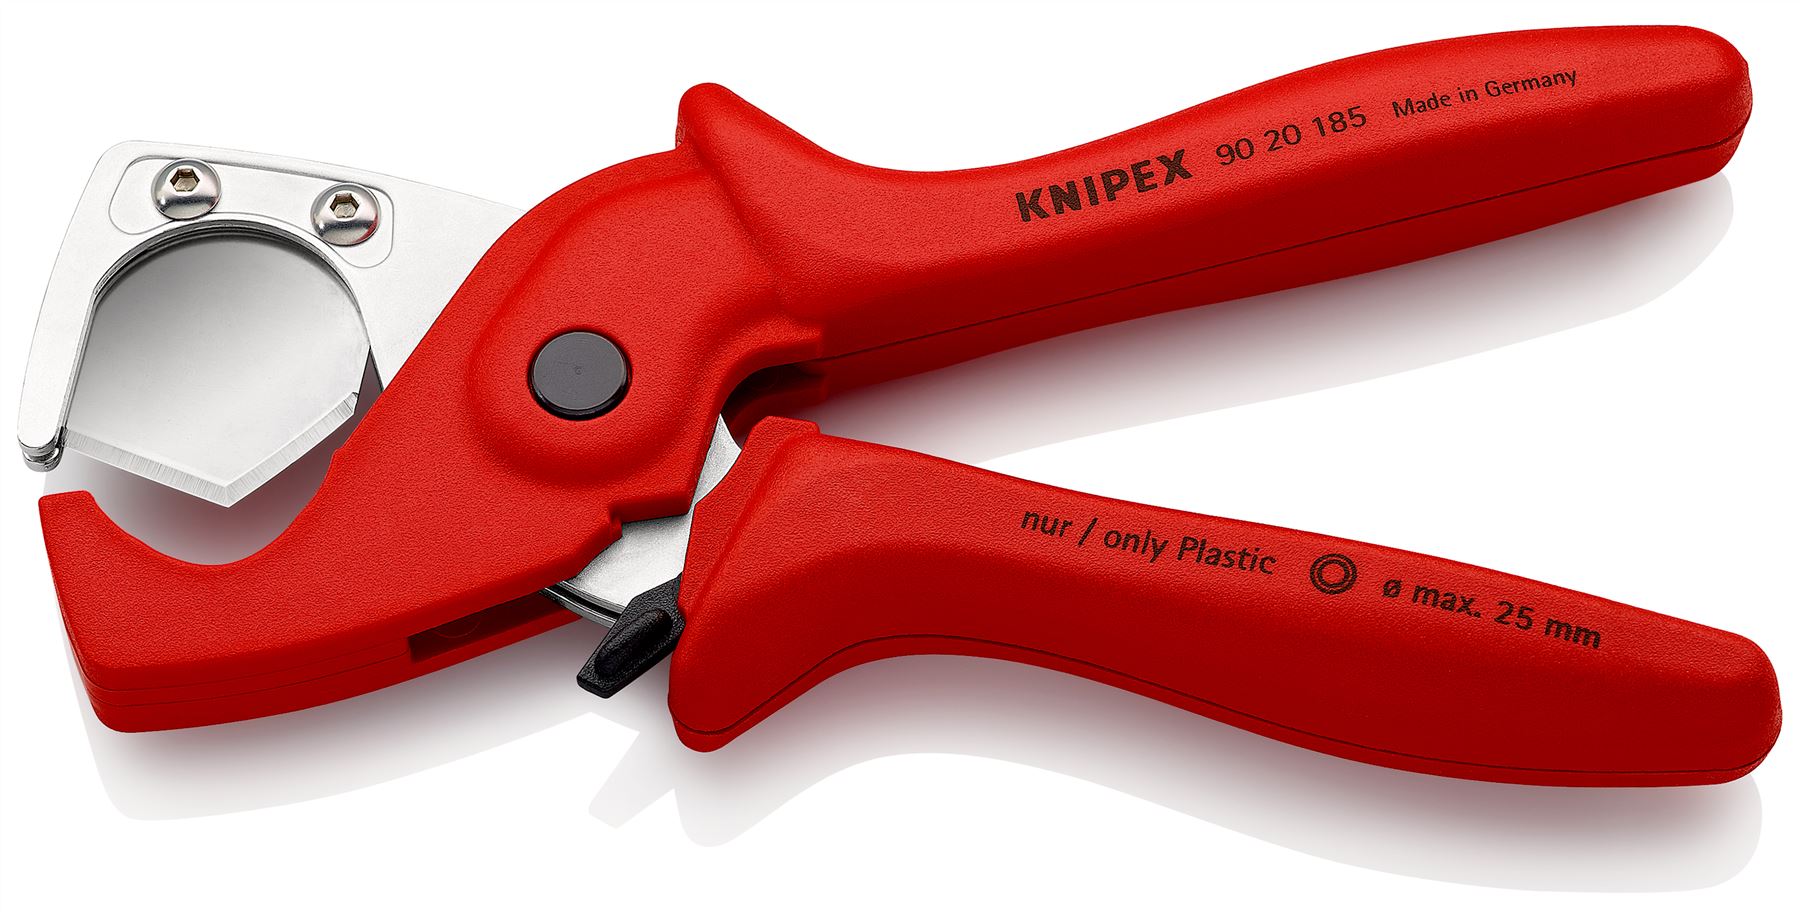 Knipex PlastiCut Cutter fro Flexible Hoses and Plastic Conduit Pipe 185mm 25mm Capacity 90 20 185